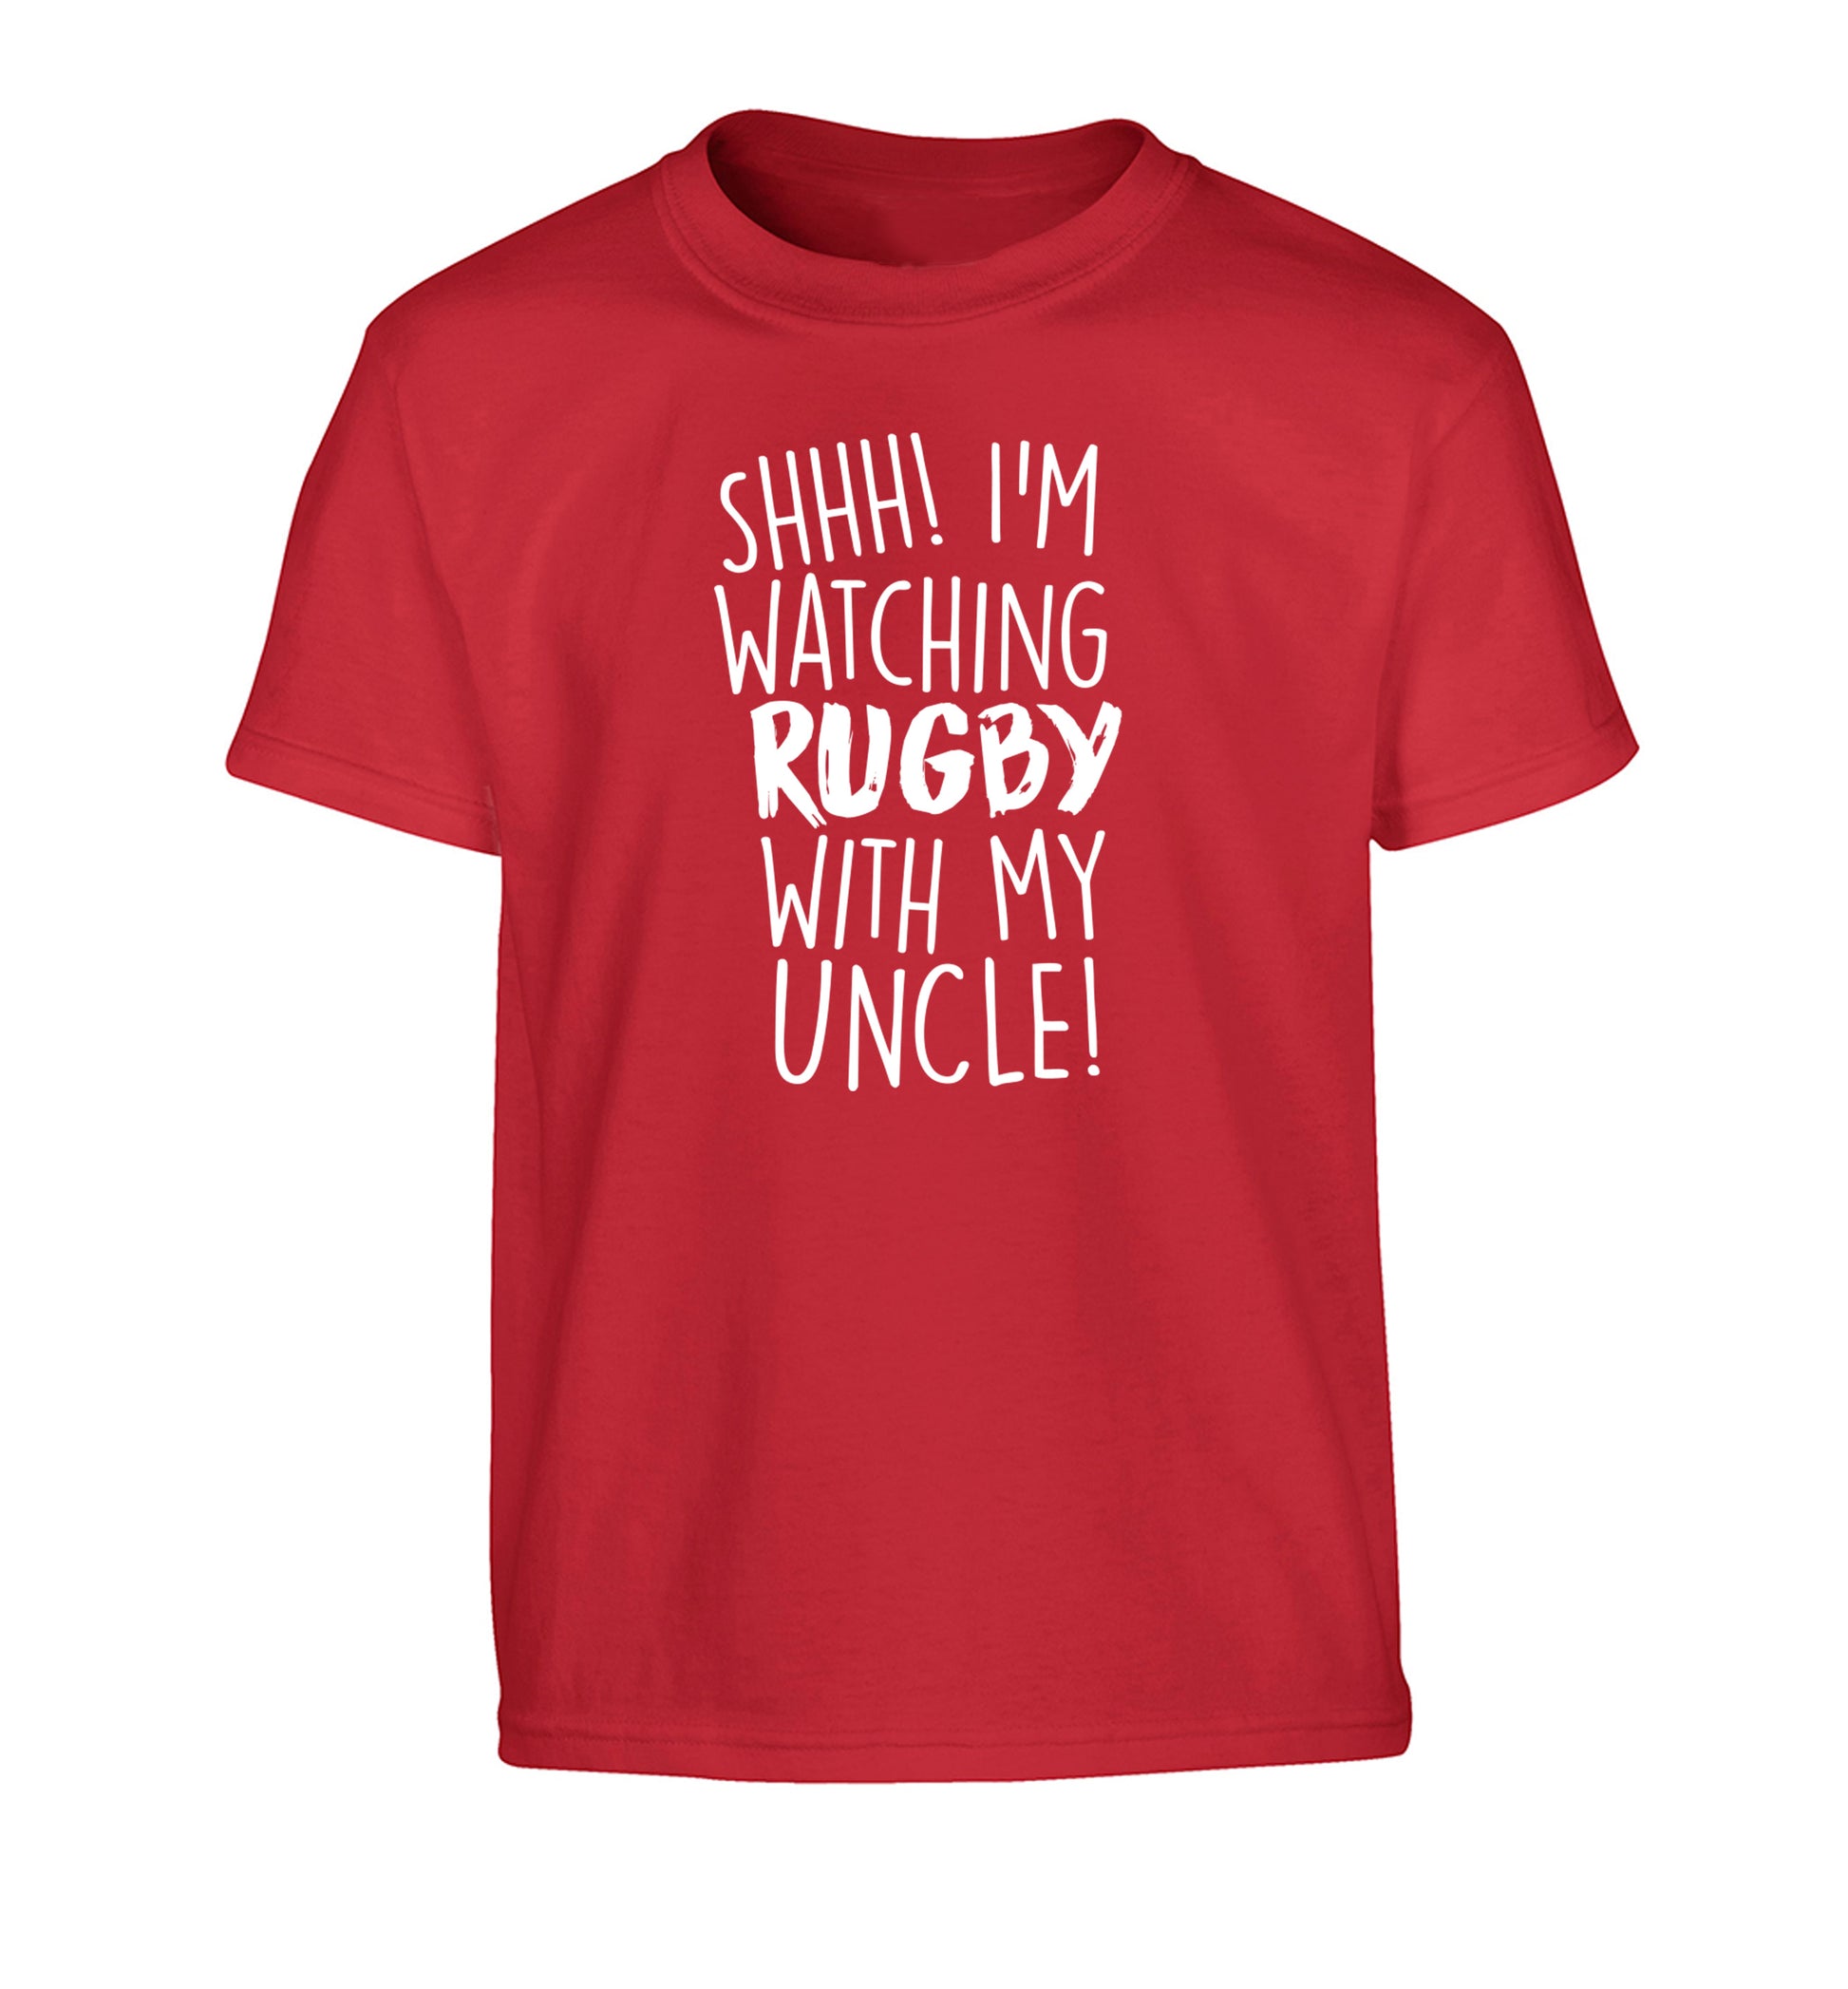 Shh.. I'm watching rugby with my uncle Children's red Tshirt 12-13 Years